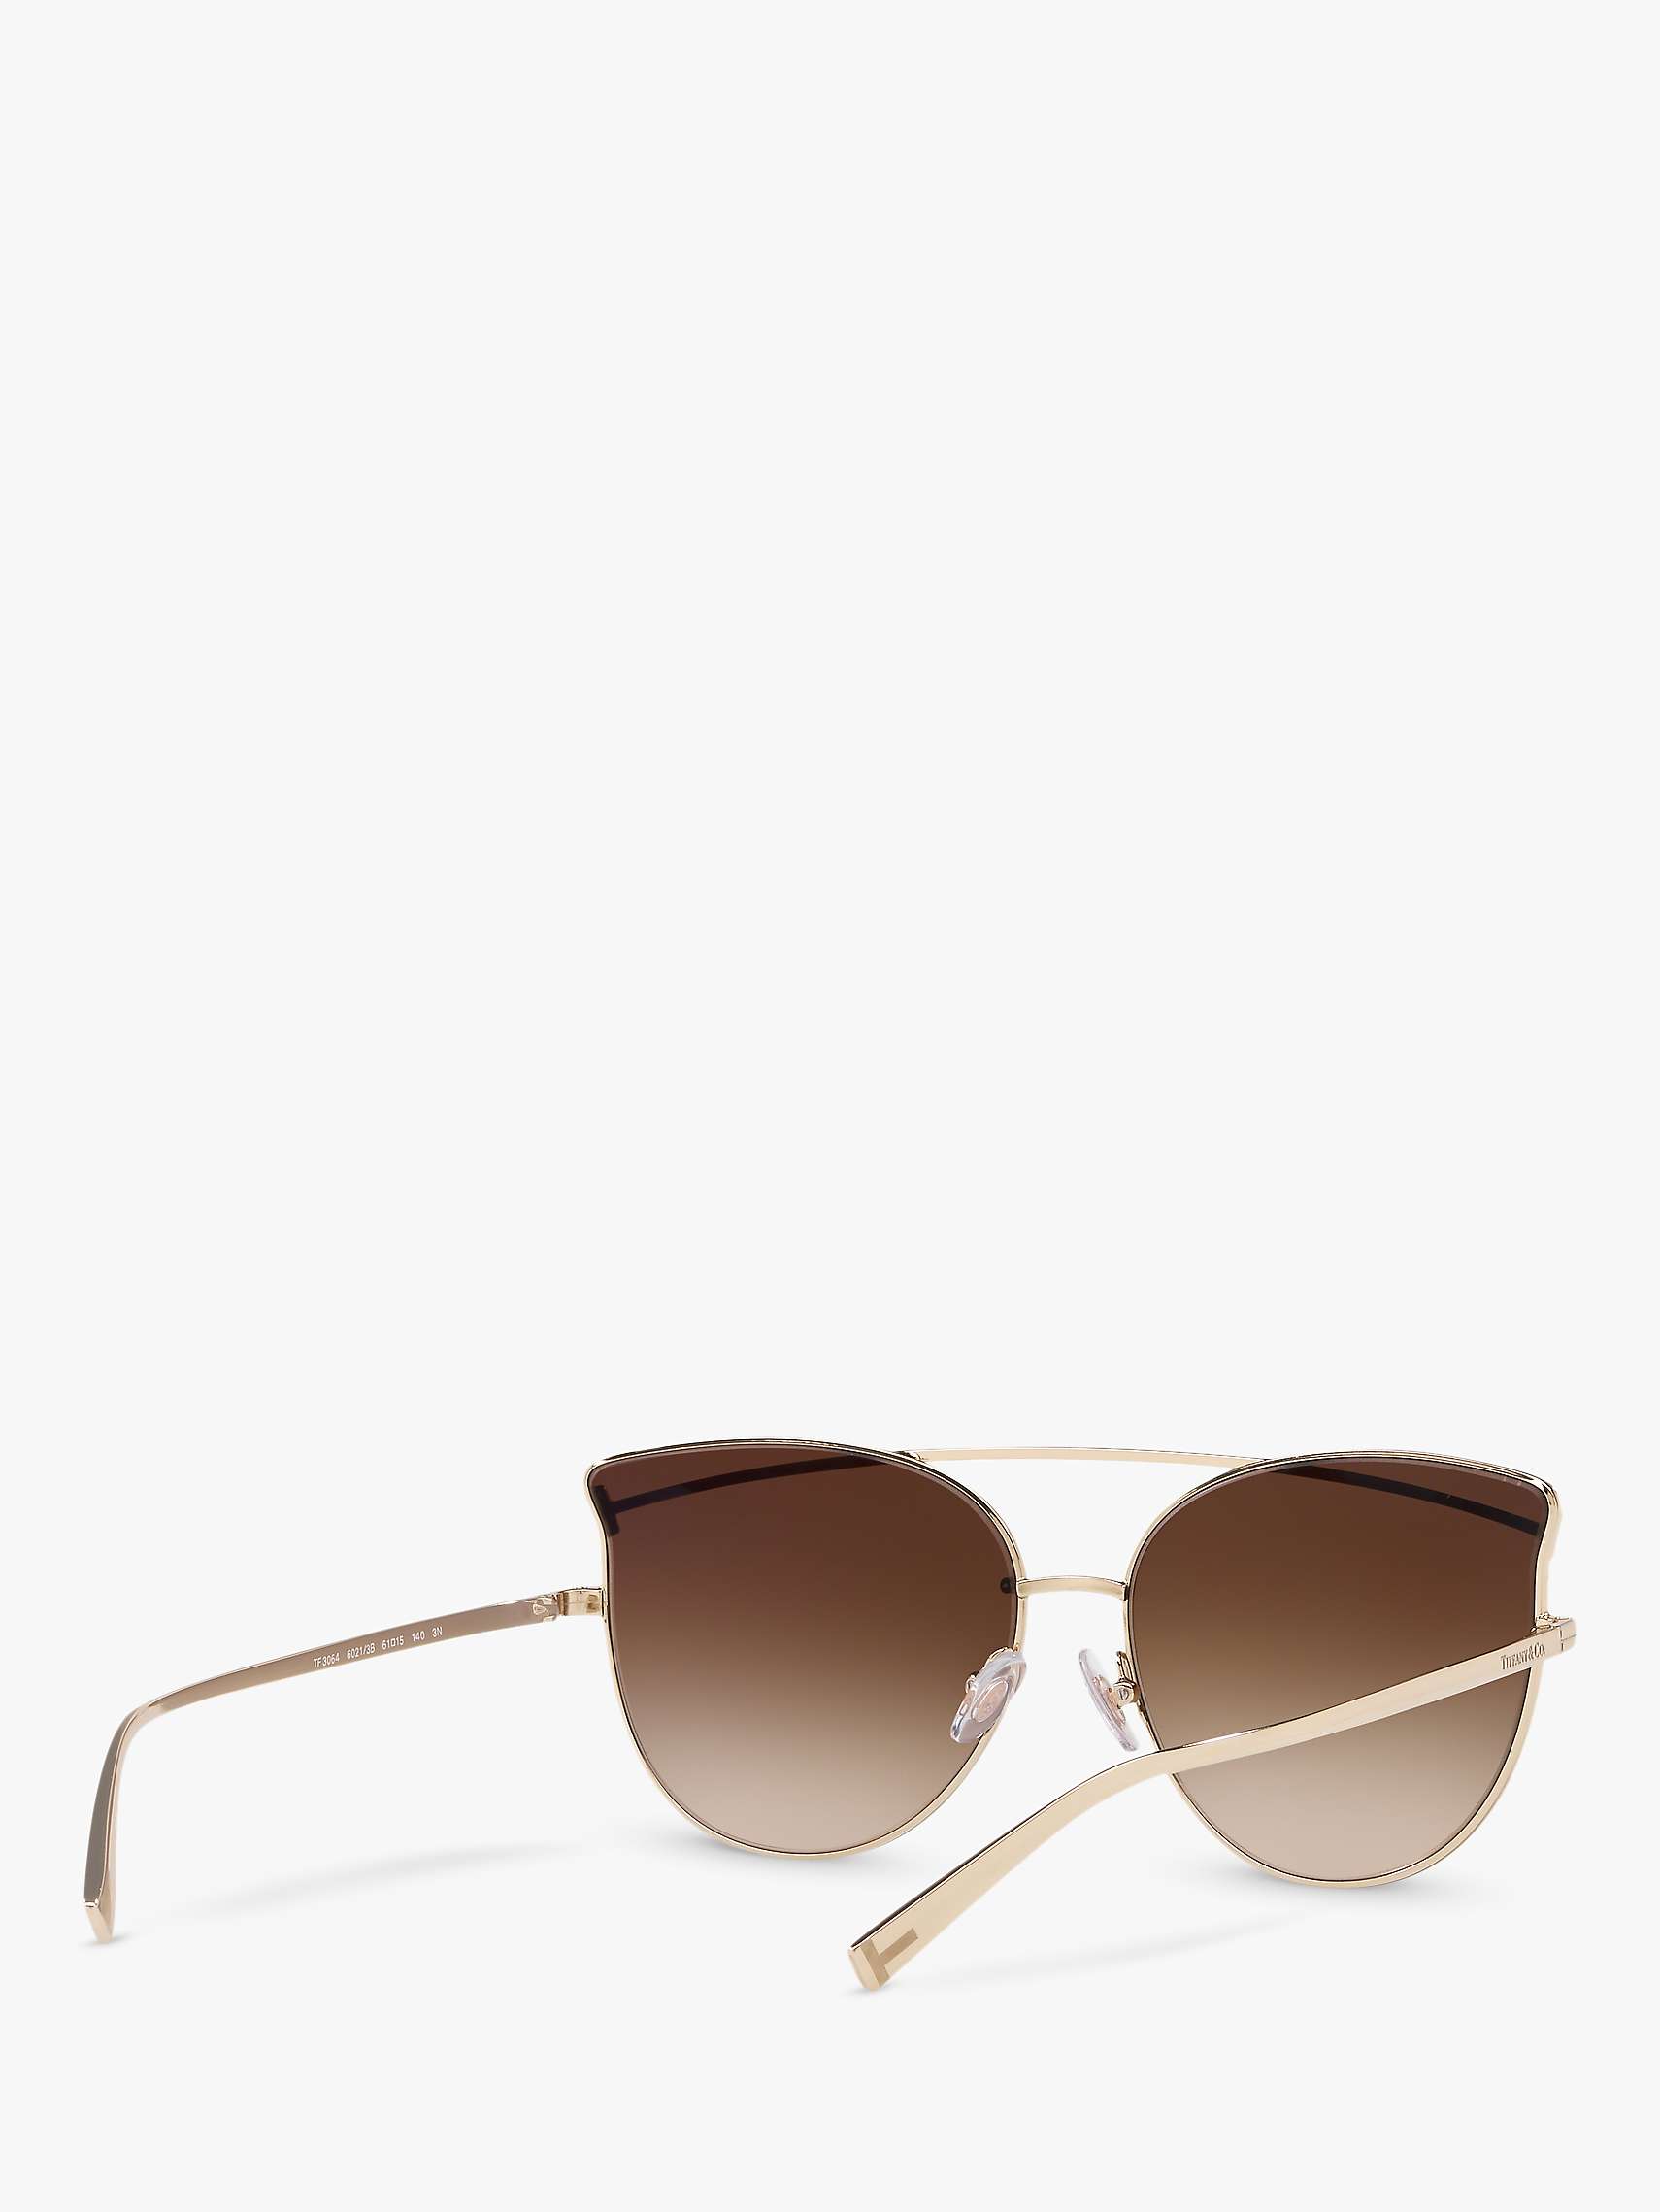 Buy Tiffany & Co TF3064 Women's Cat's Eye Sunglasses, Pale Gold/Brown Gradient Online at johnlewis.com